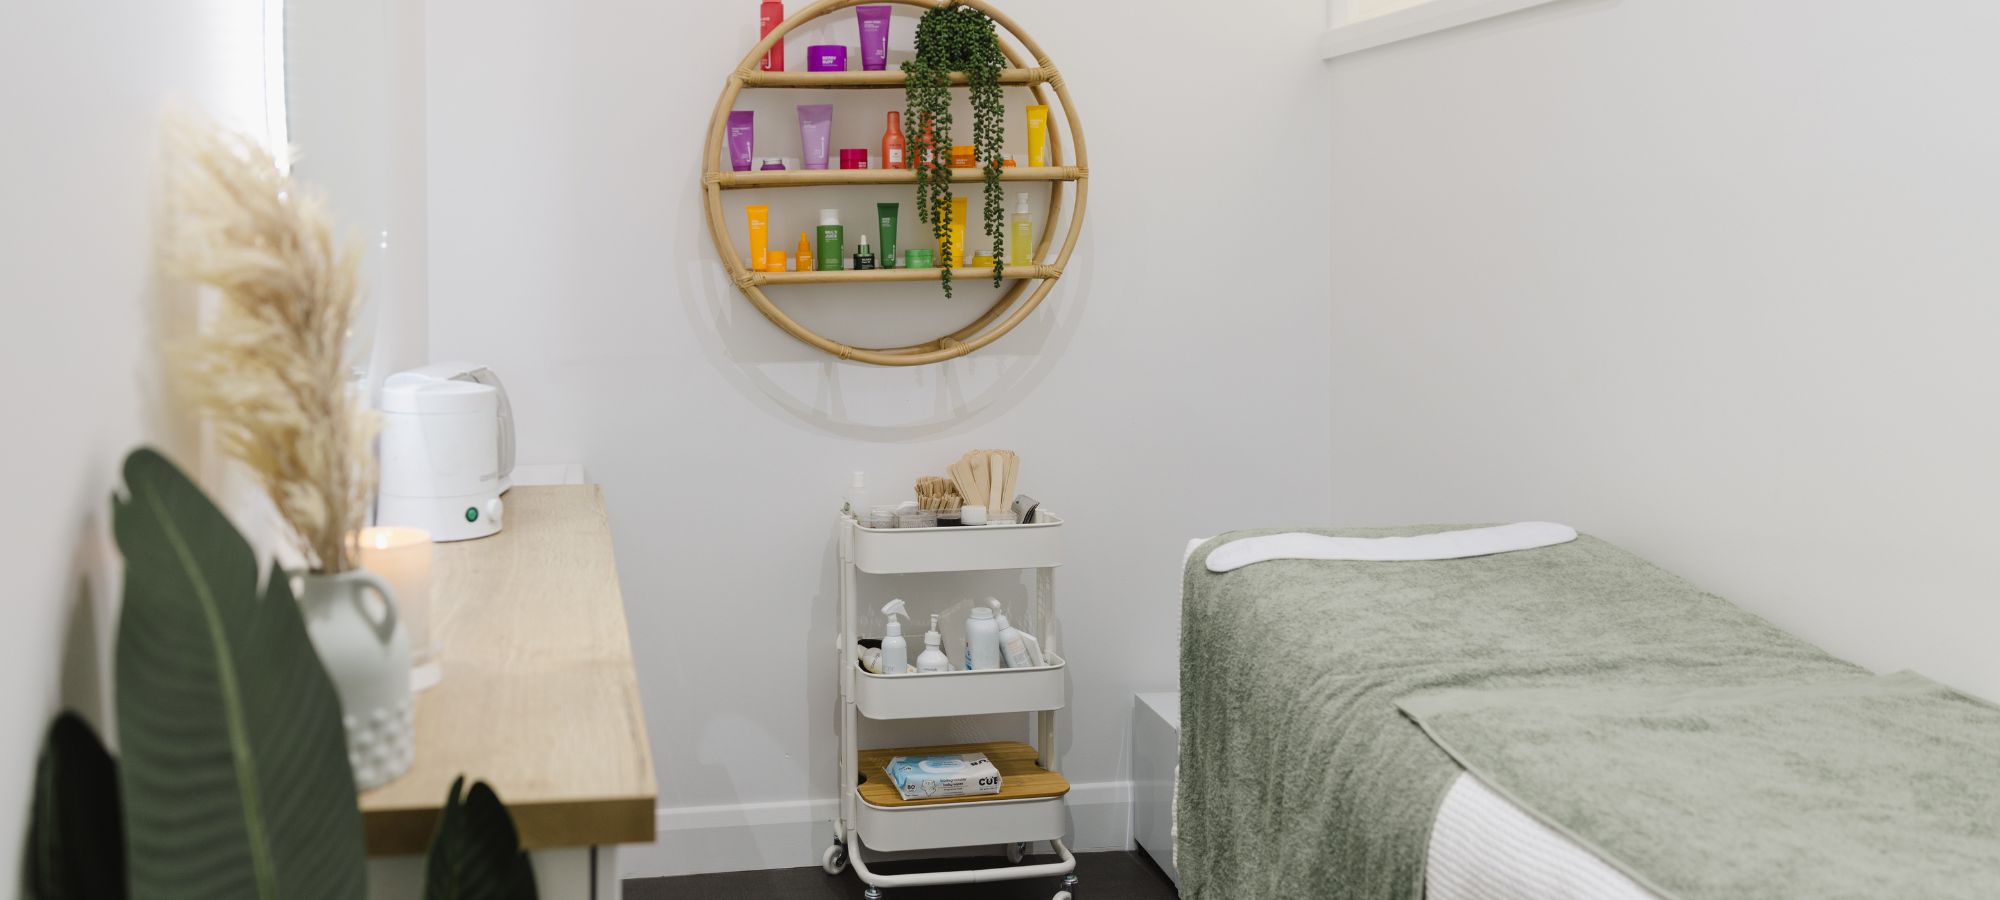 Makeup and Beauty Lounge Waxing and Facial Room, Moonee Ponds Beauty Salon provides services such as Brazilian Waxing, Body waxing, eyebrow waxing, facial waxing, Facials, Skin Juice Facials. In a relaxing facial room